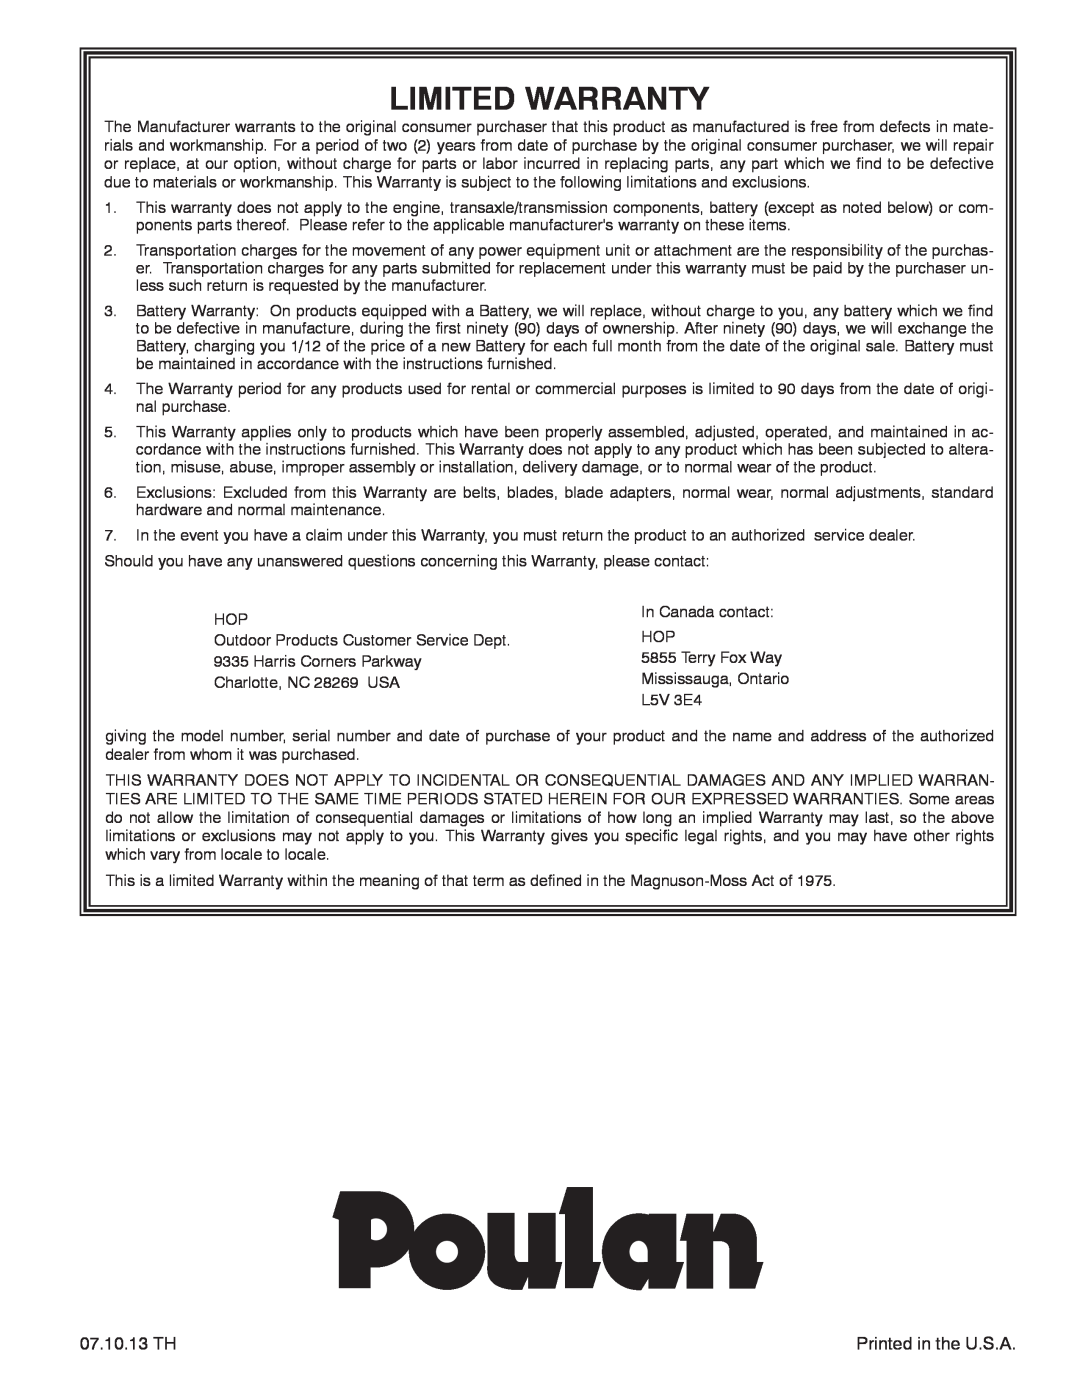 Poulan P14530ES owner manual Limited Warranty, 07.10.13 TH 